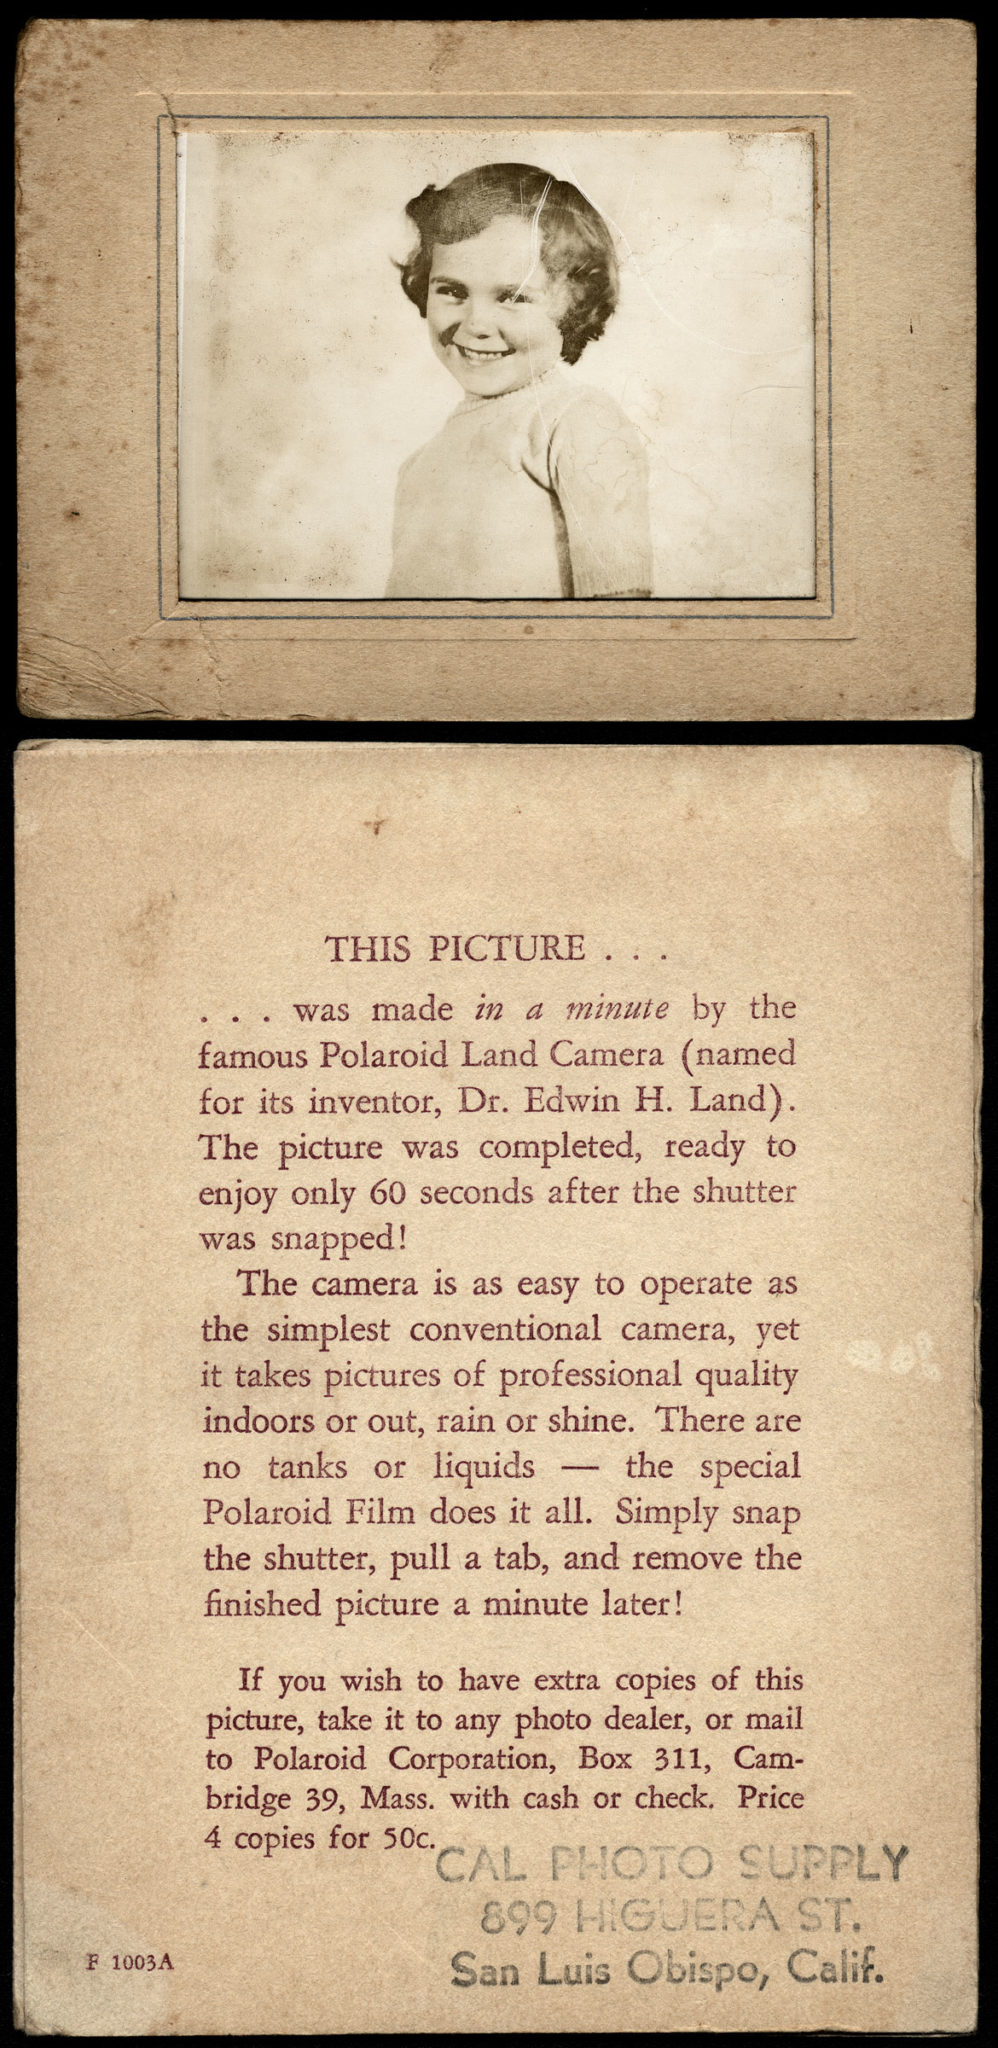 This is How the Polaroid Was First Explained When It Was a New Concept